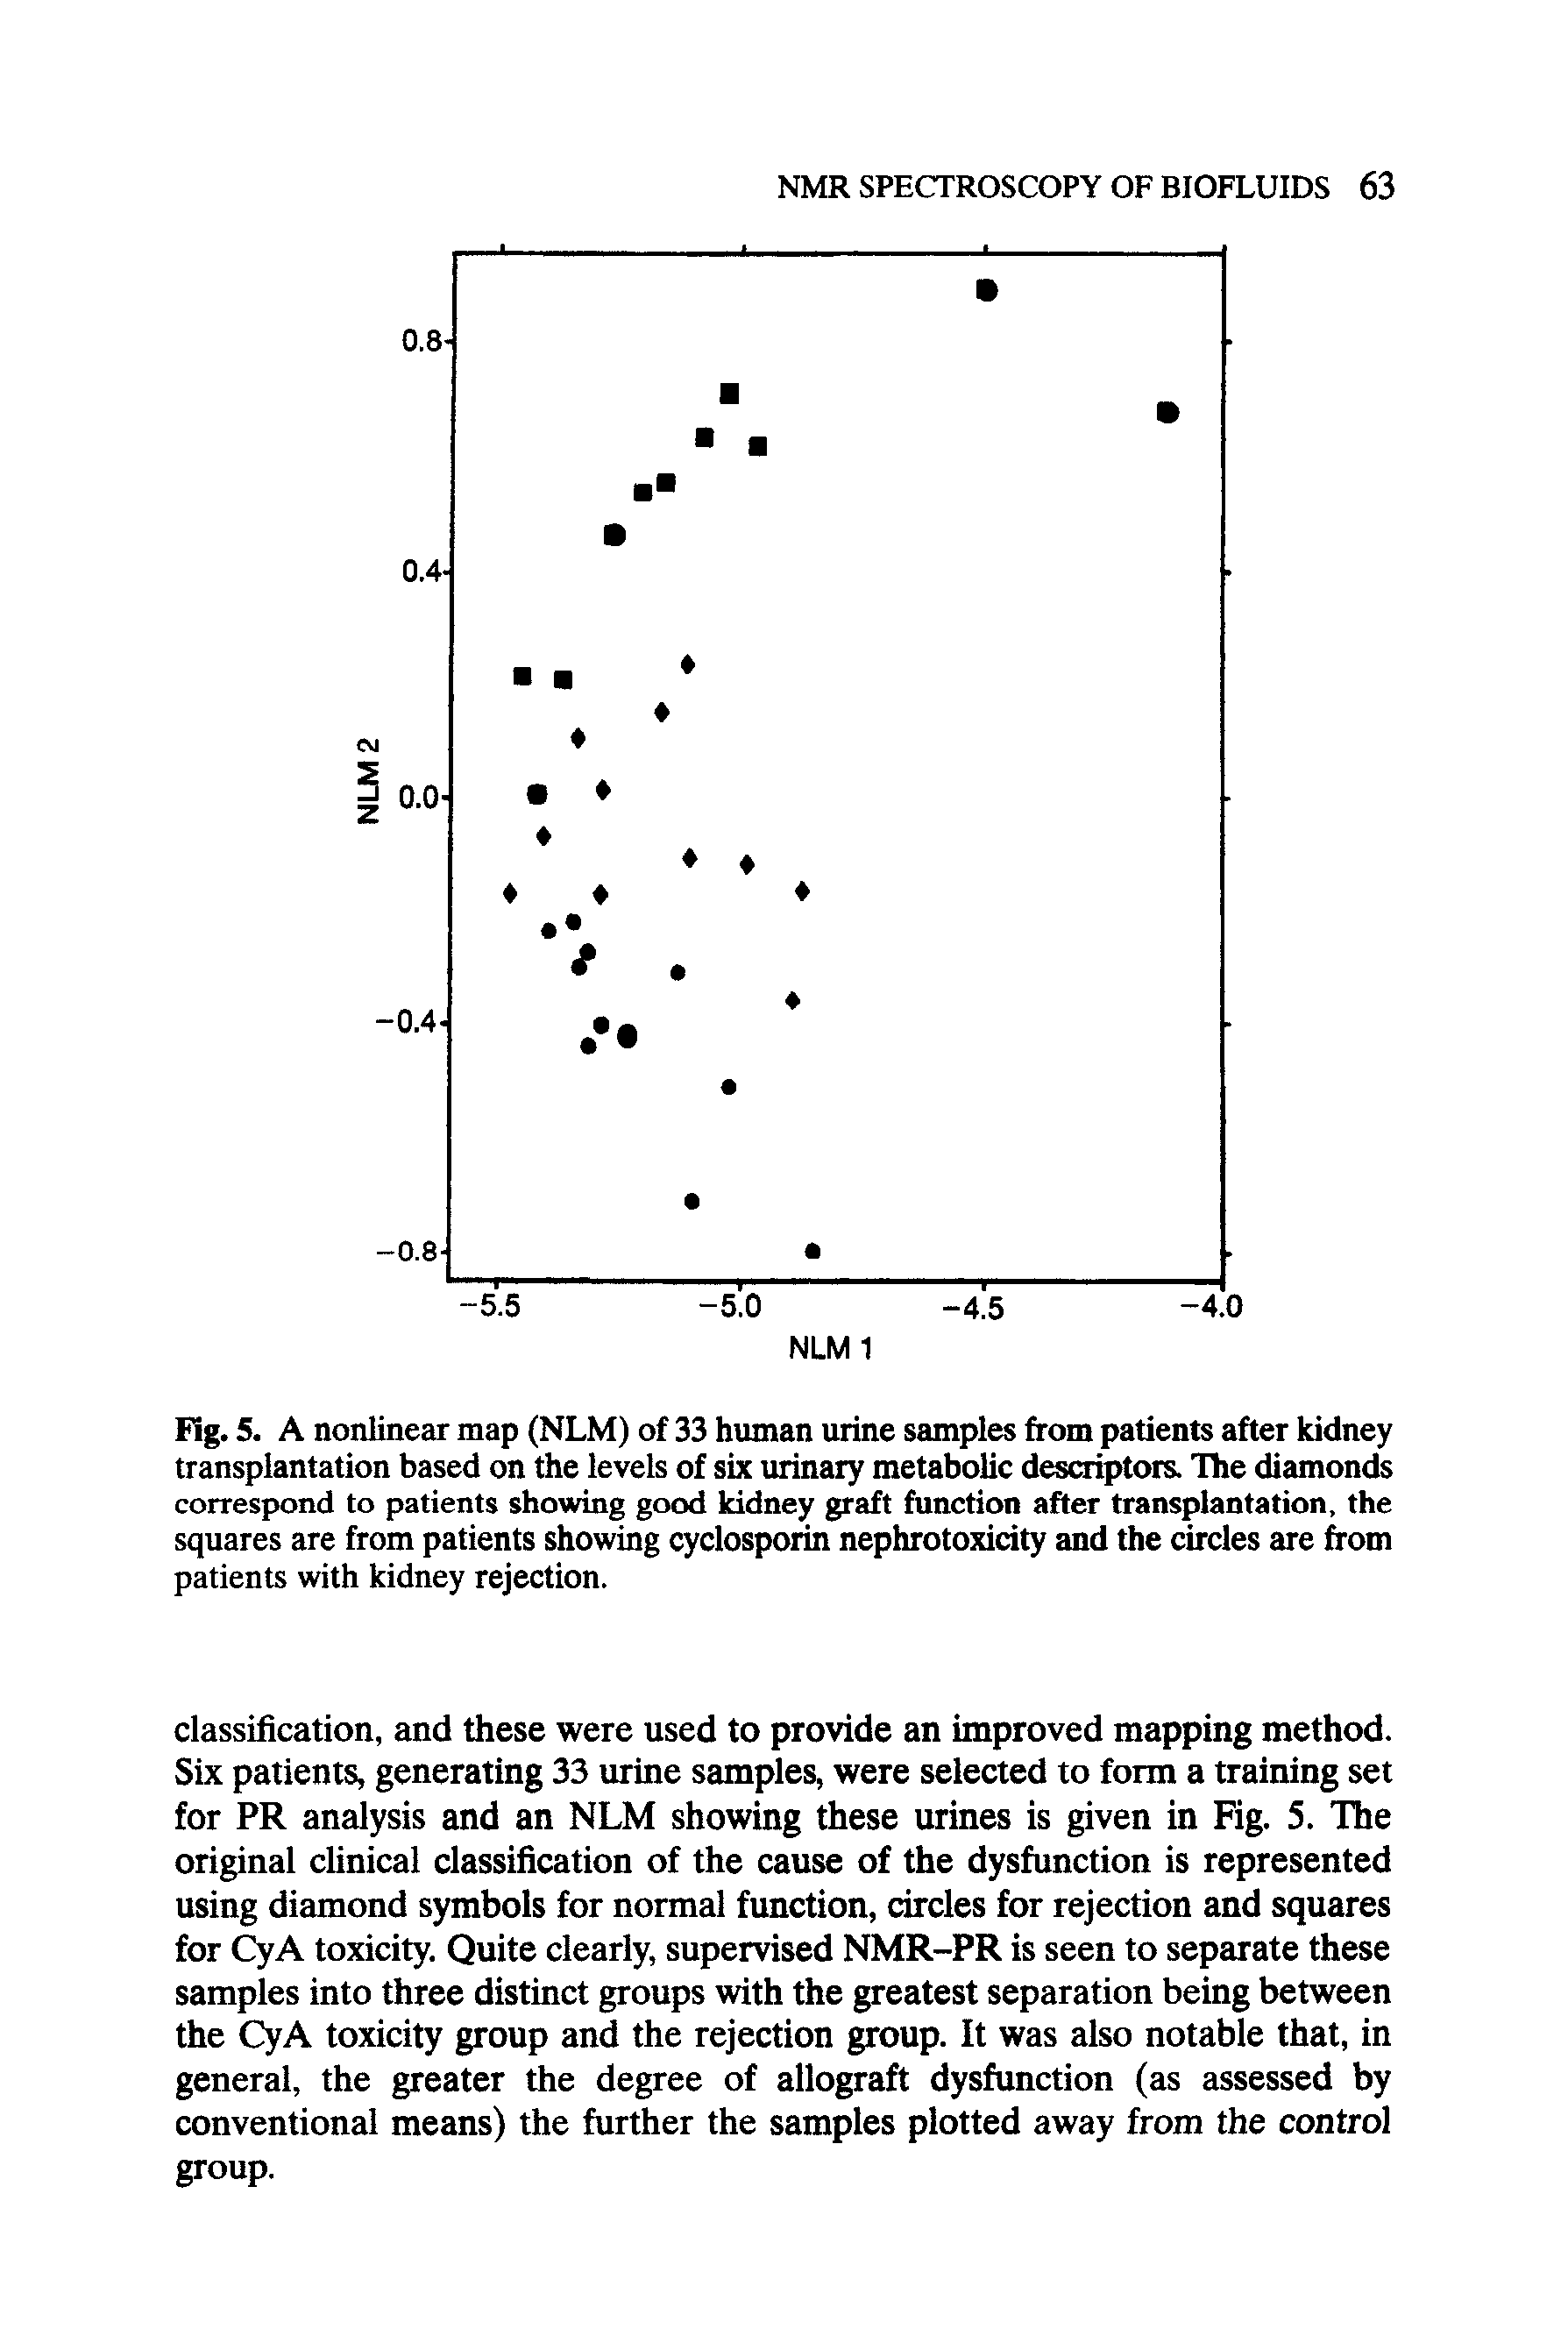 Fig. 5. A nonlinear map (NLM) of 33 human urine samples from patients after kidney transplantation based on the levels of six urinary metabolic descriptors. The diamonds correspond to patients showing good kidney graft function after transplantation, the squares are from patients showing cyclosporin nephrotoxicity and the circles are from patients with kidney rejection.